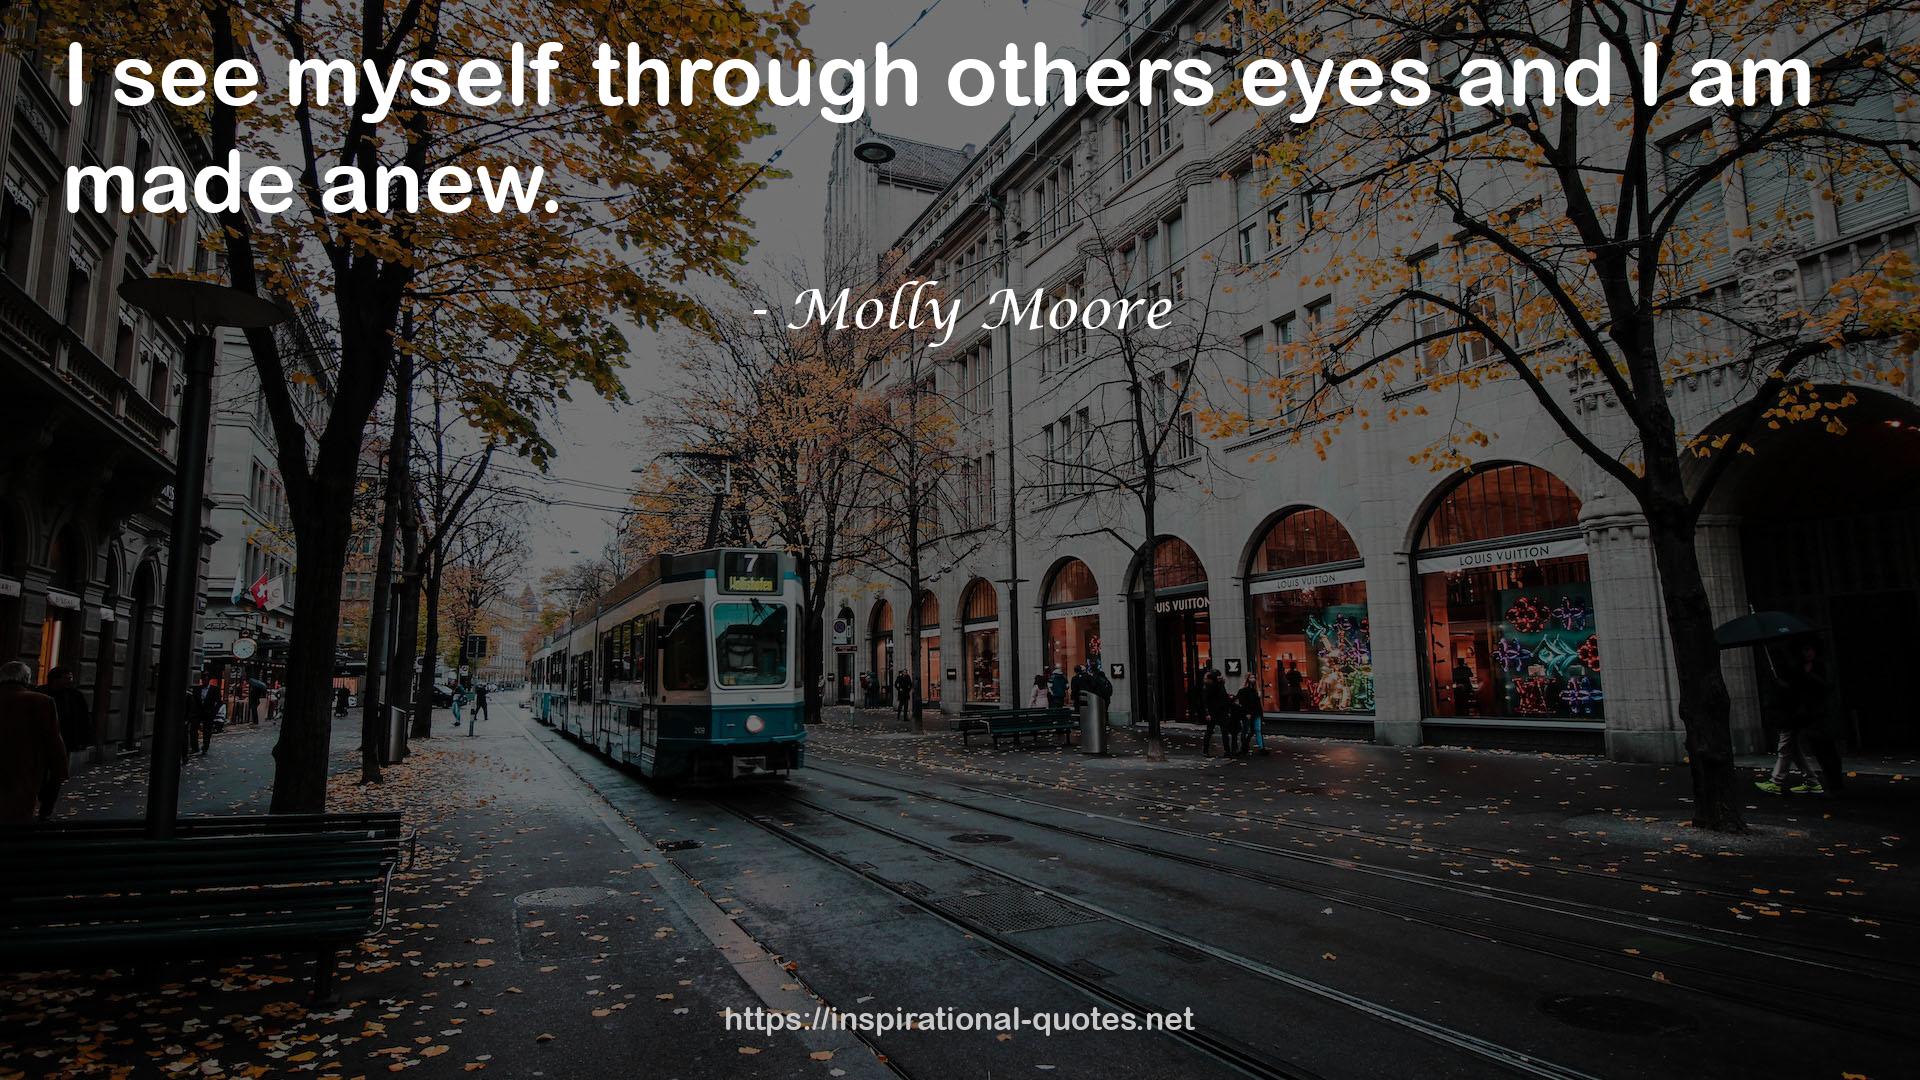 Molly Moore QUOTES